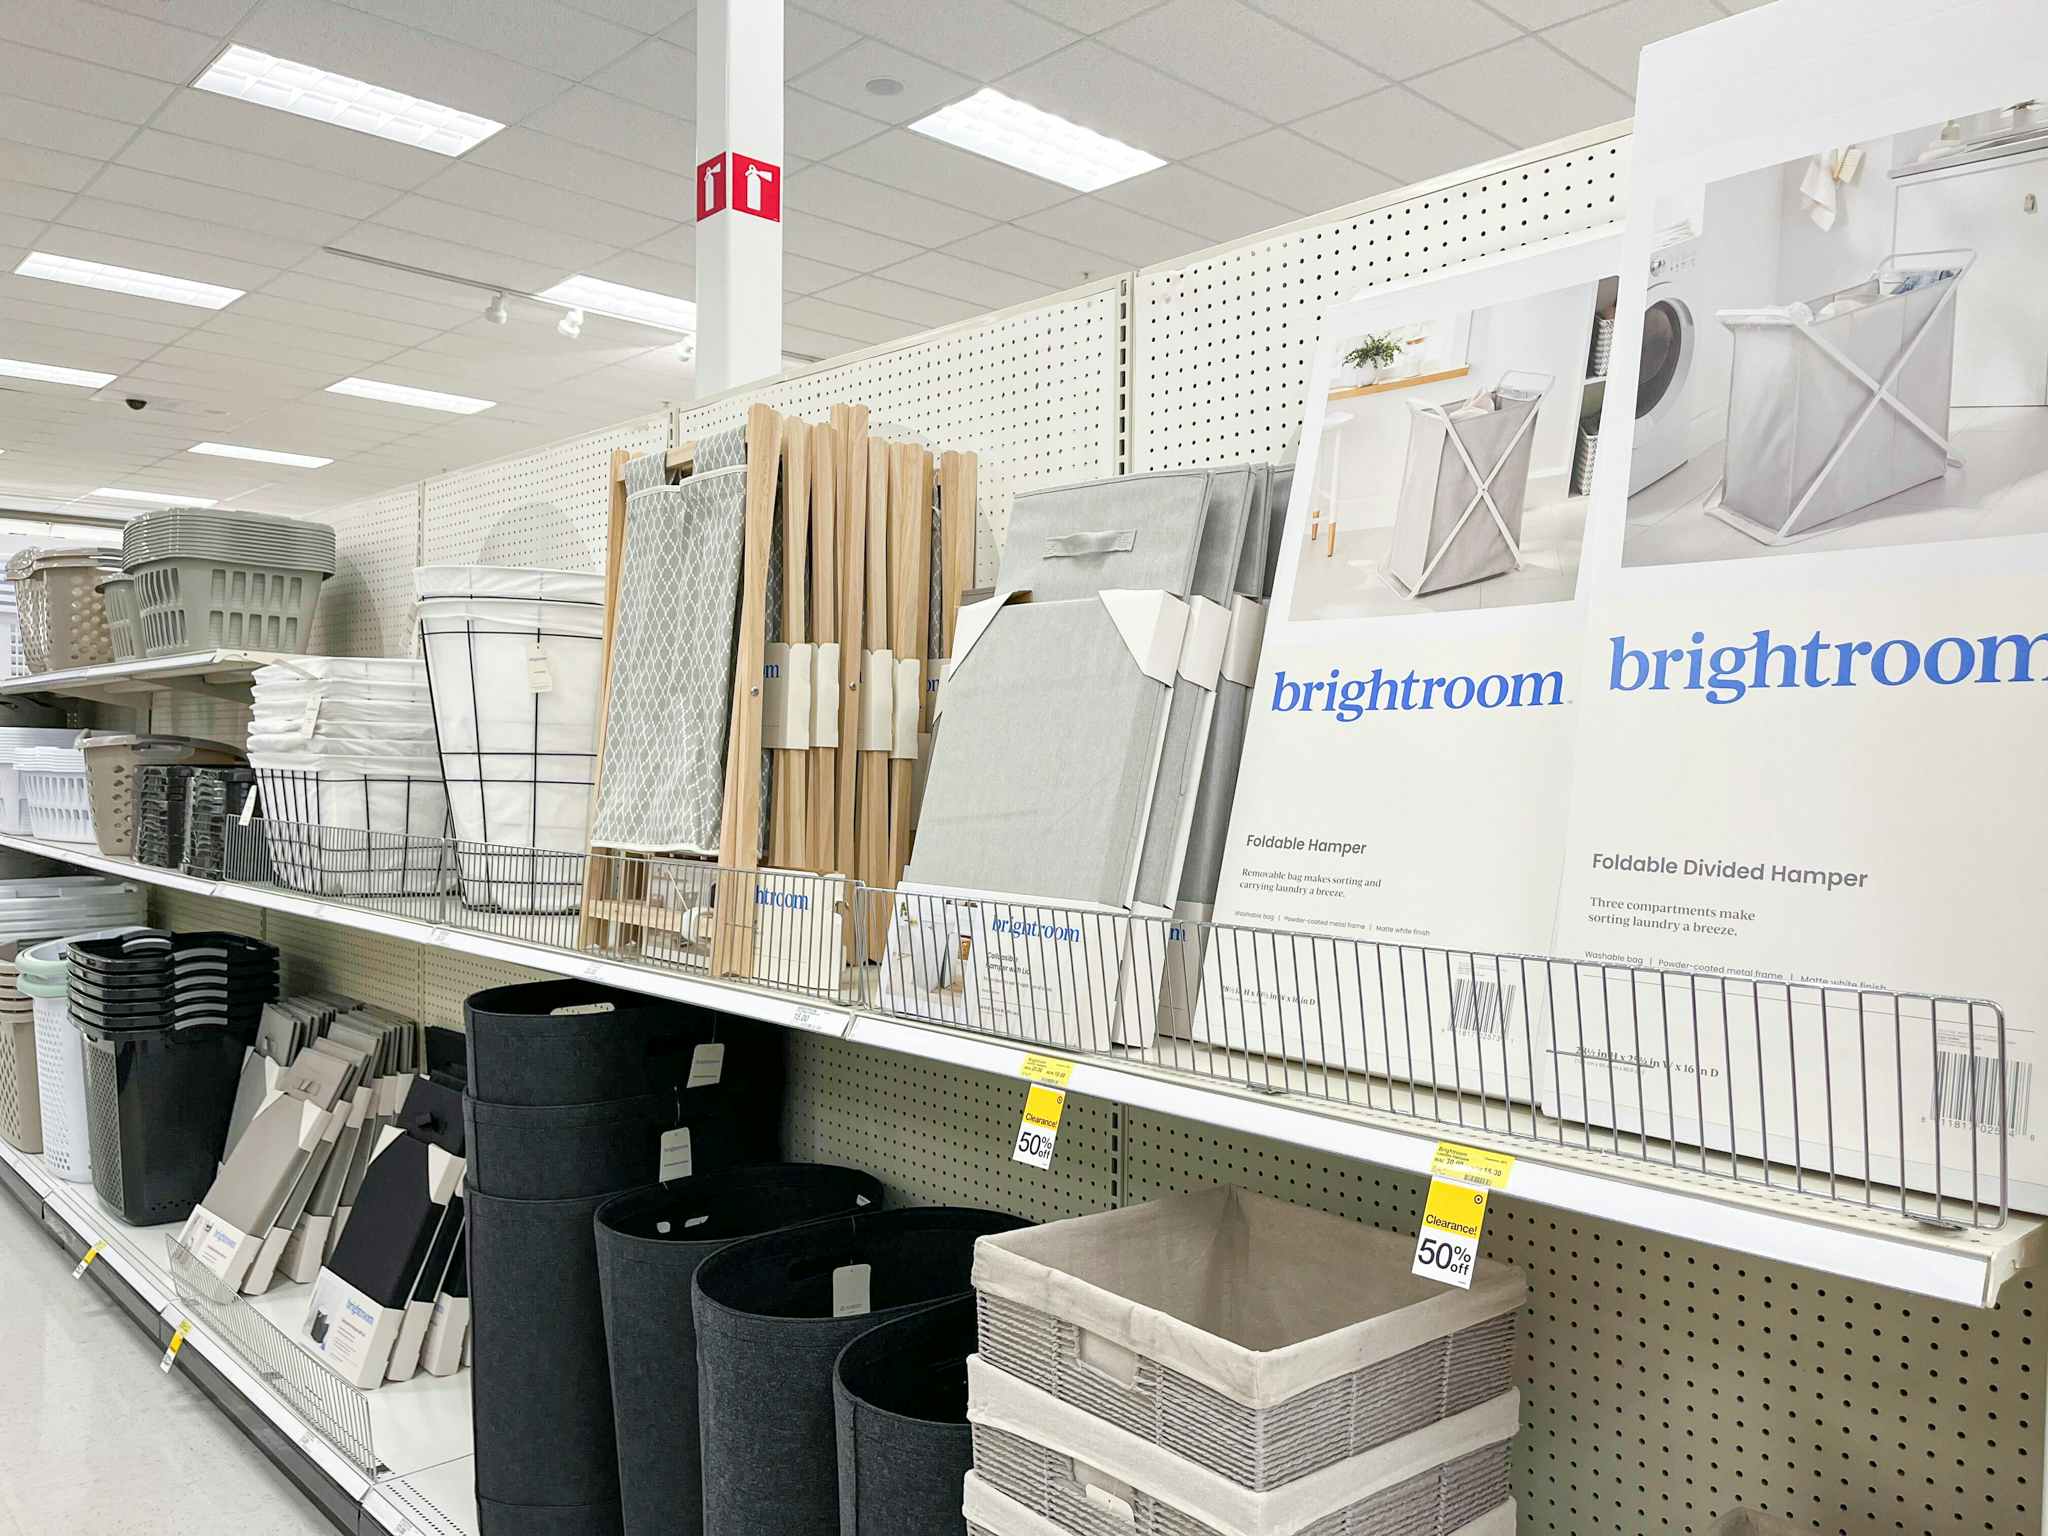 Brightroom Storage Clearance, 50% Off at Target